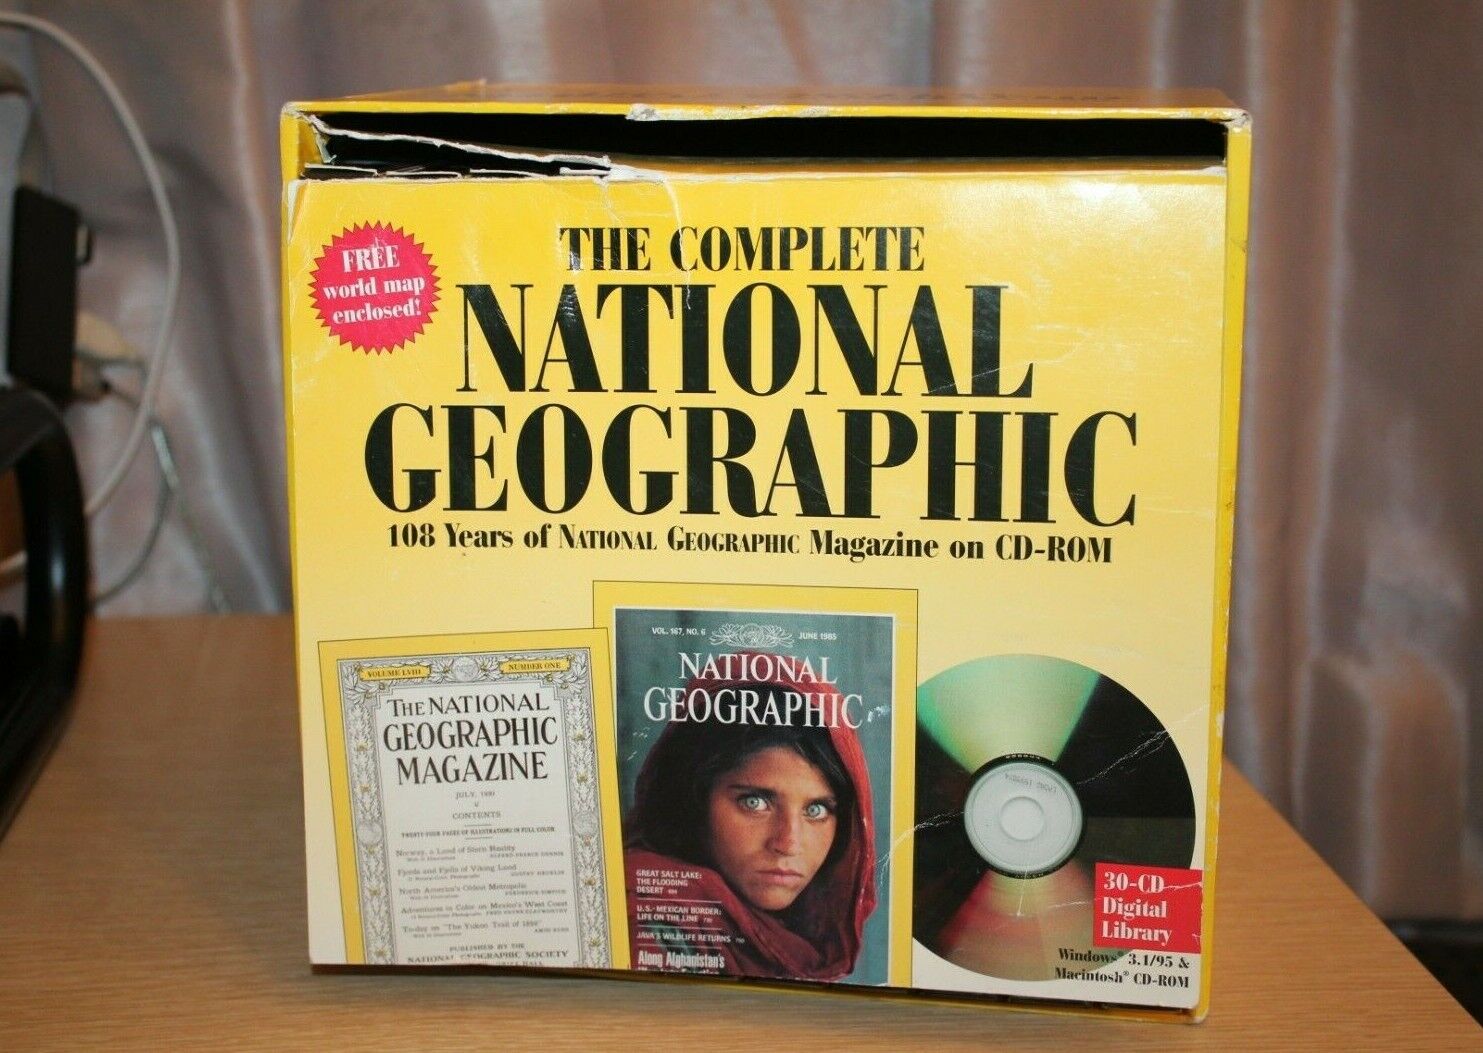 The Complete National Geographic Magazine 108 Years On CD 1888 to 1990s COMPLETE